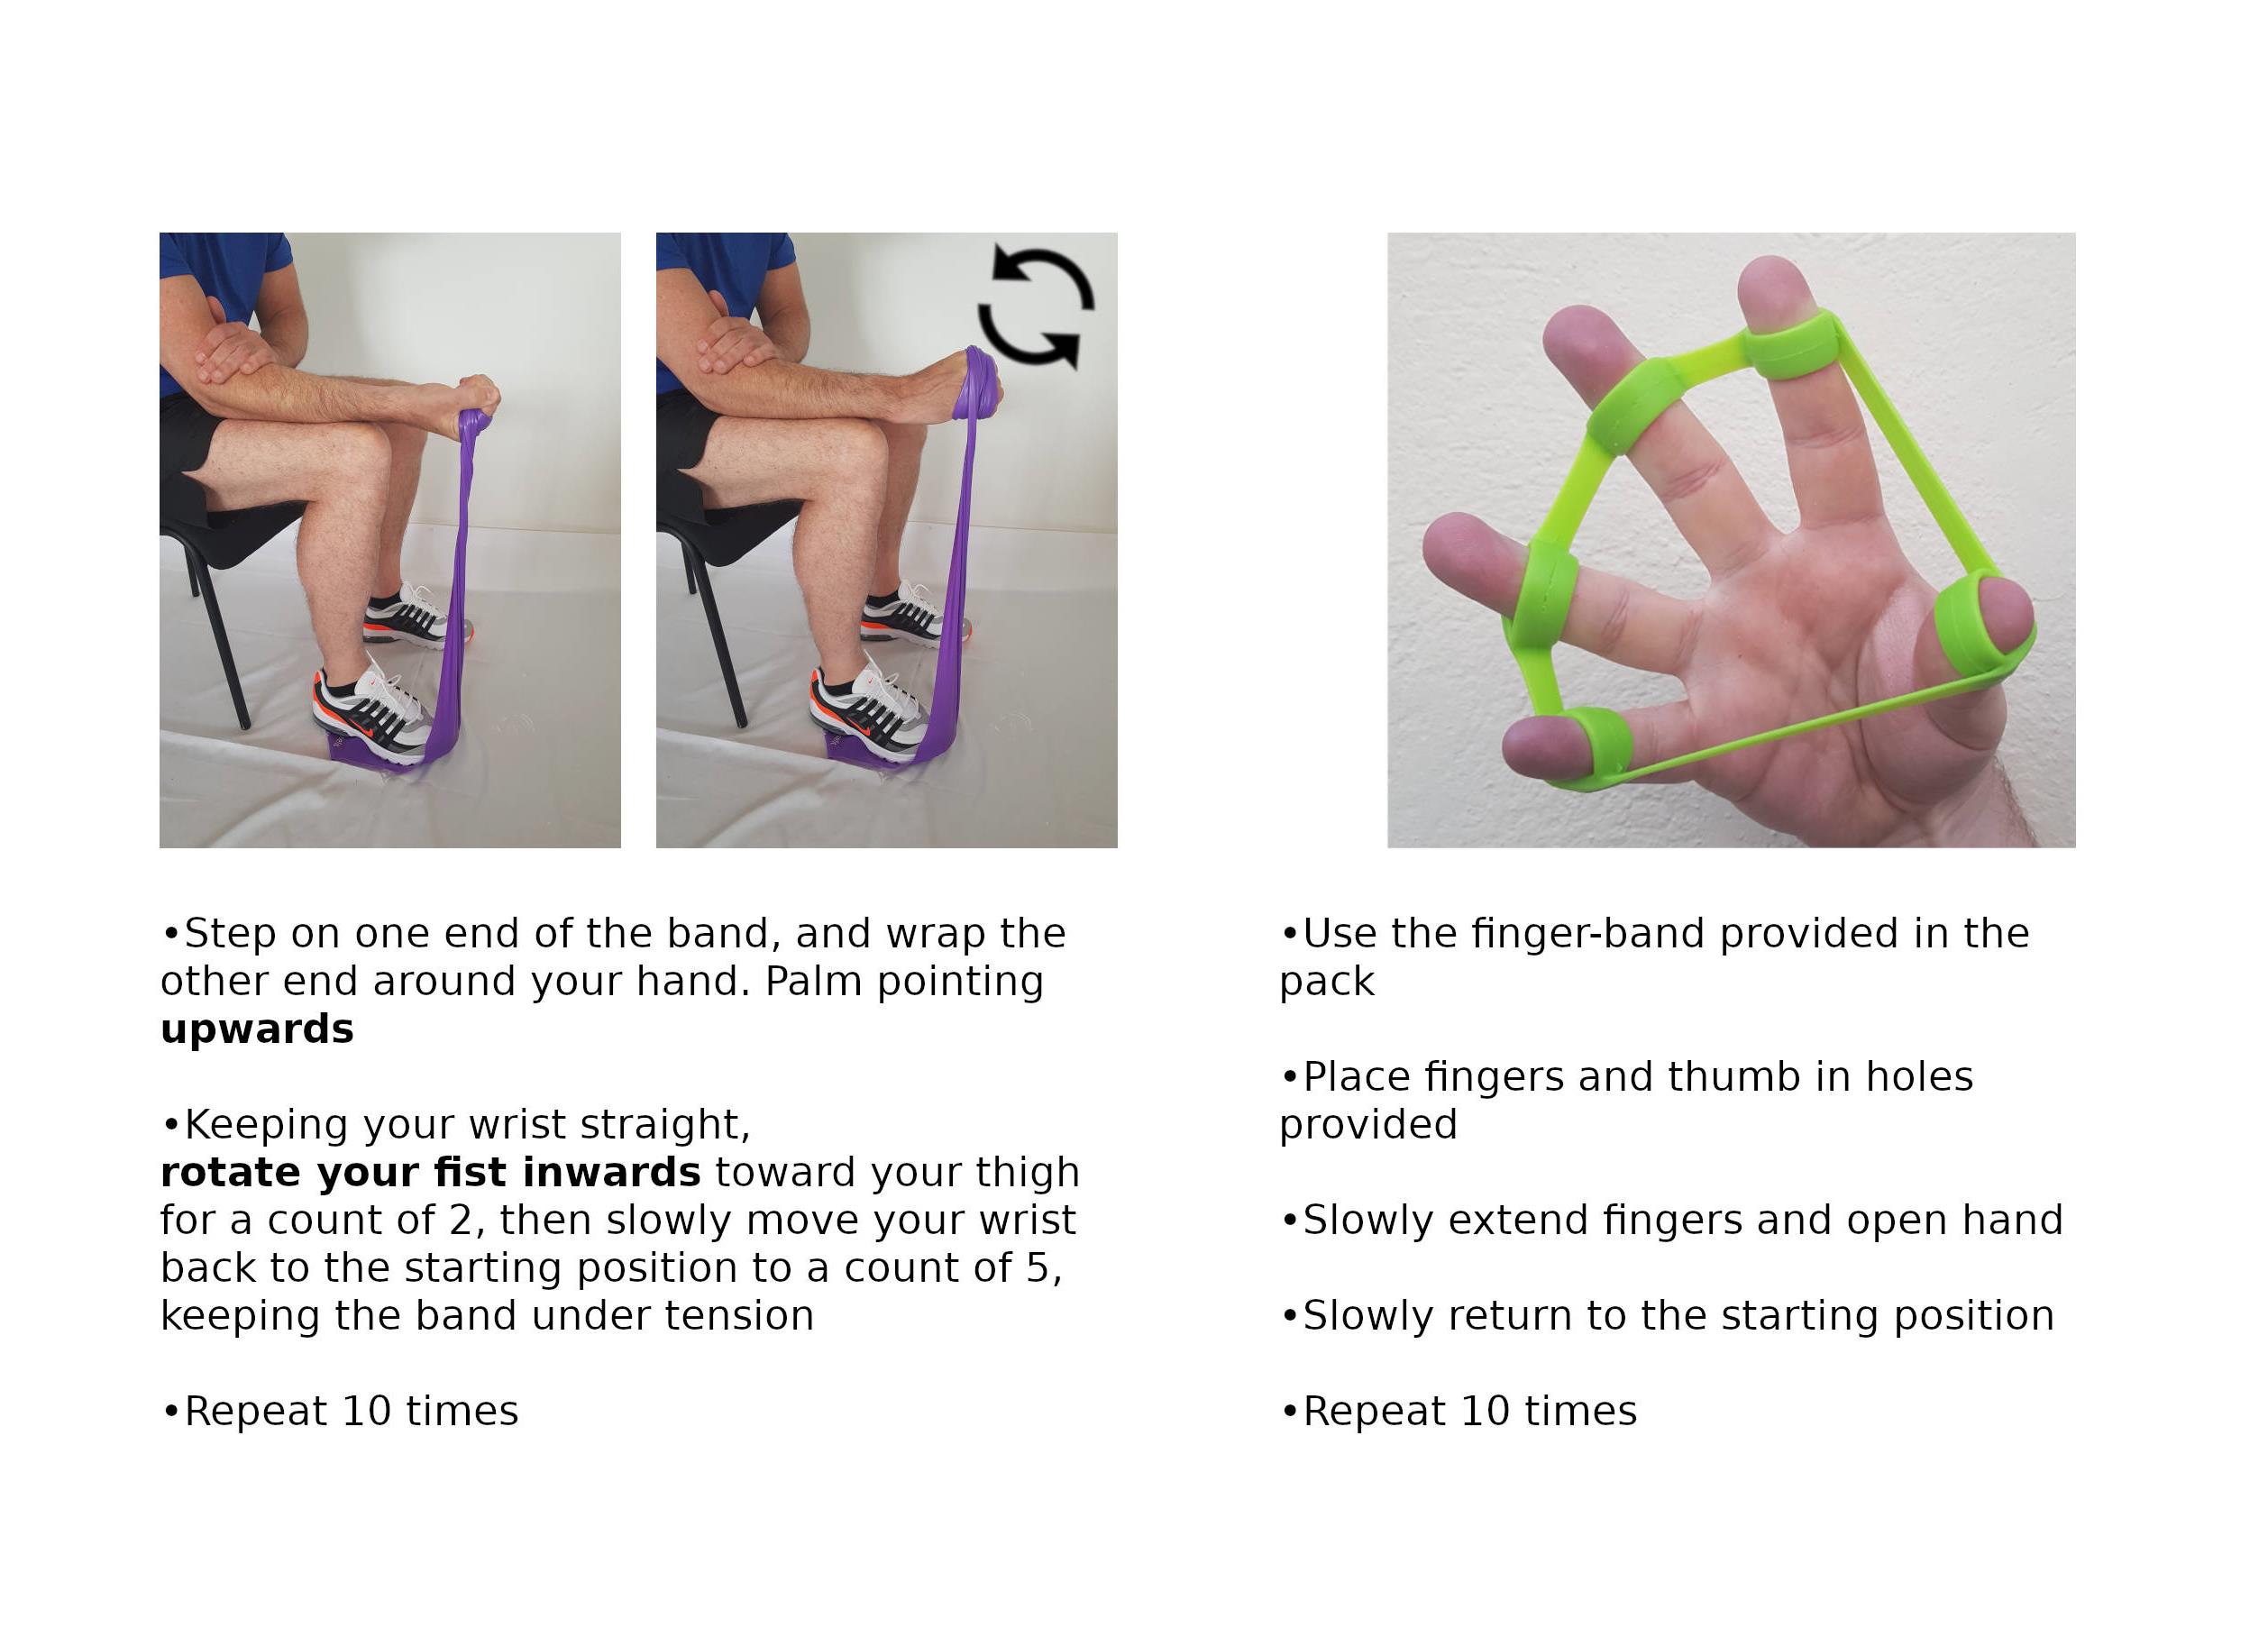 Gamers Thumb Step 5 Movement & Stretching